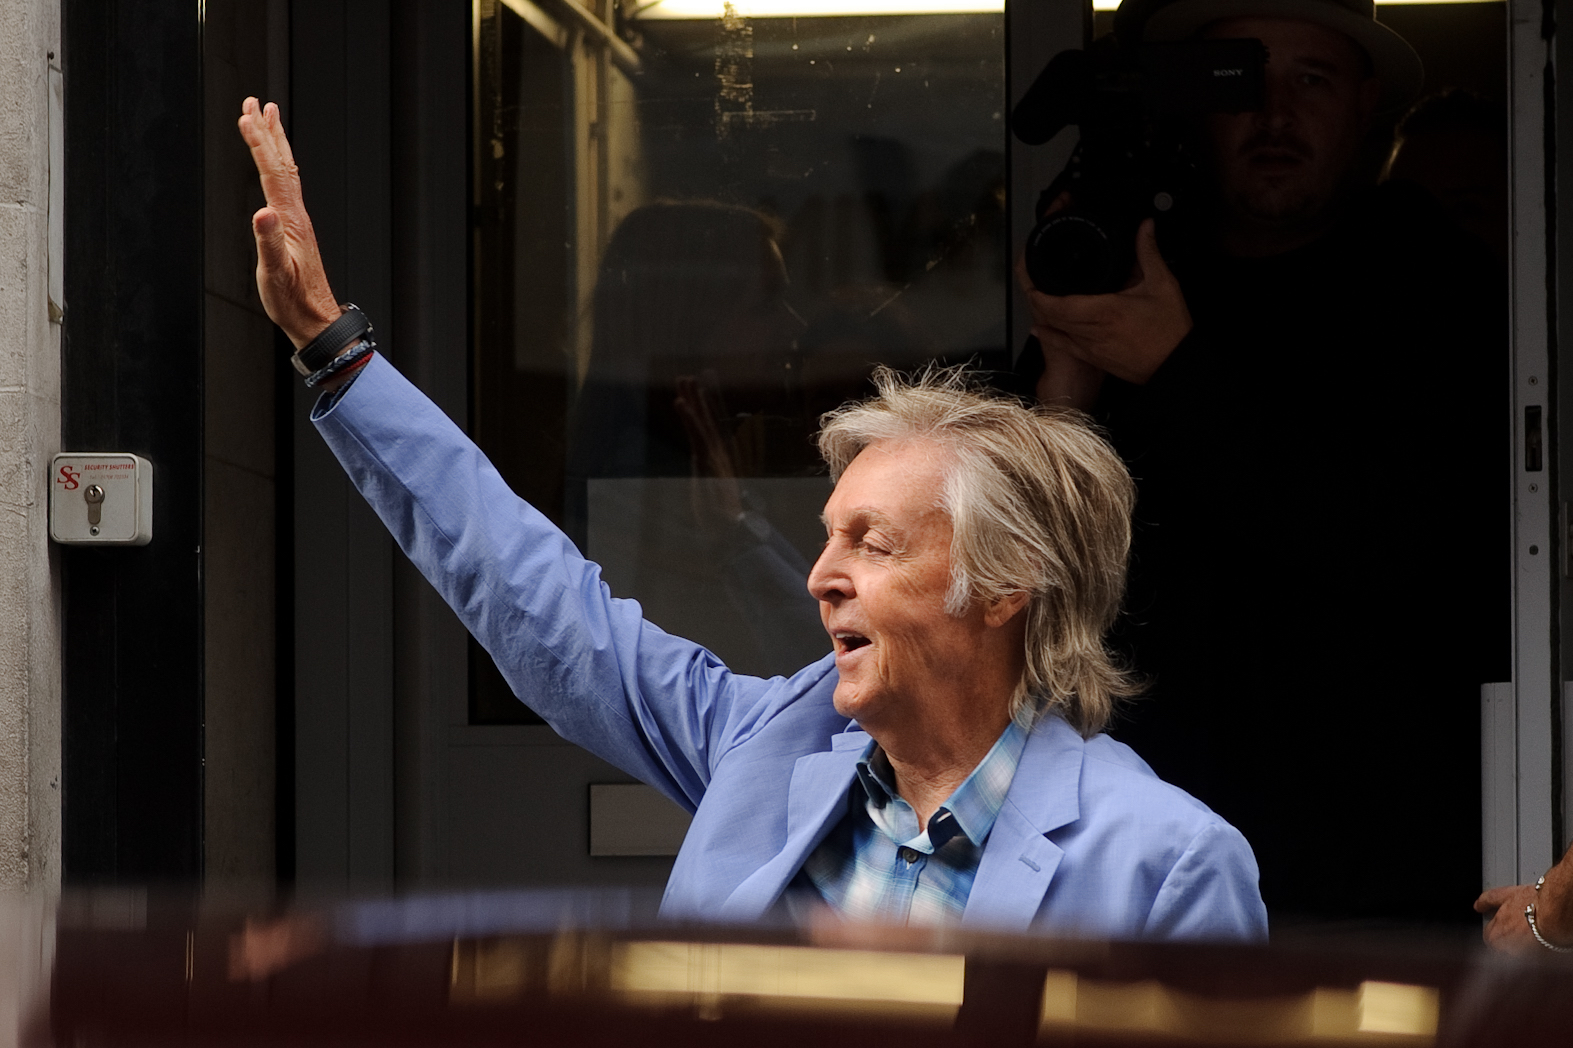 Paul McCartney spotted leaving Waterstones bookstore on Piccadilly